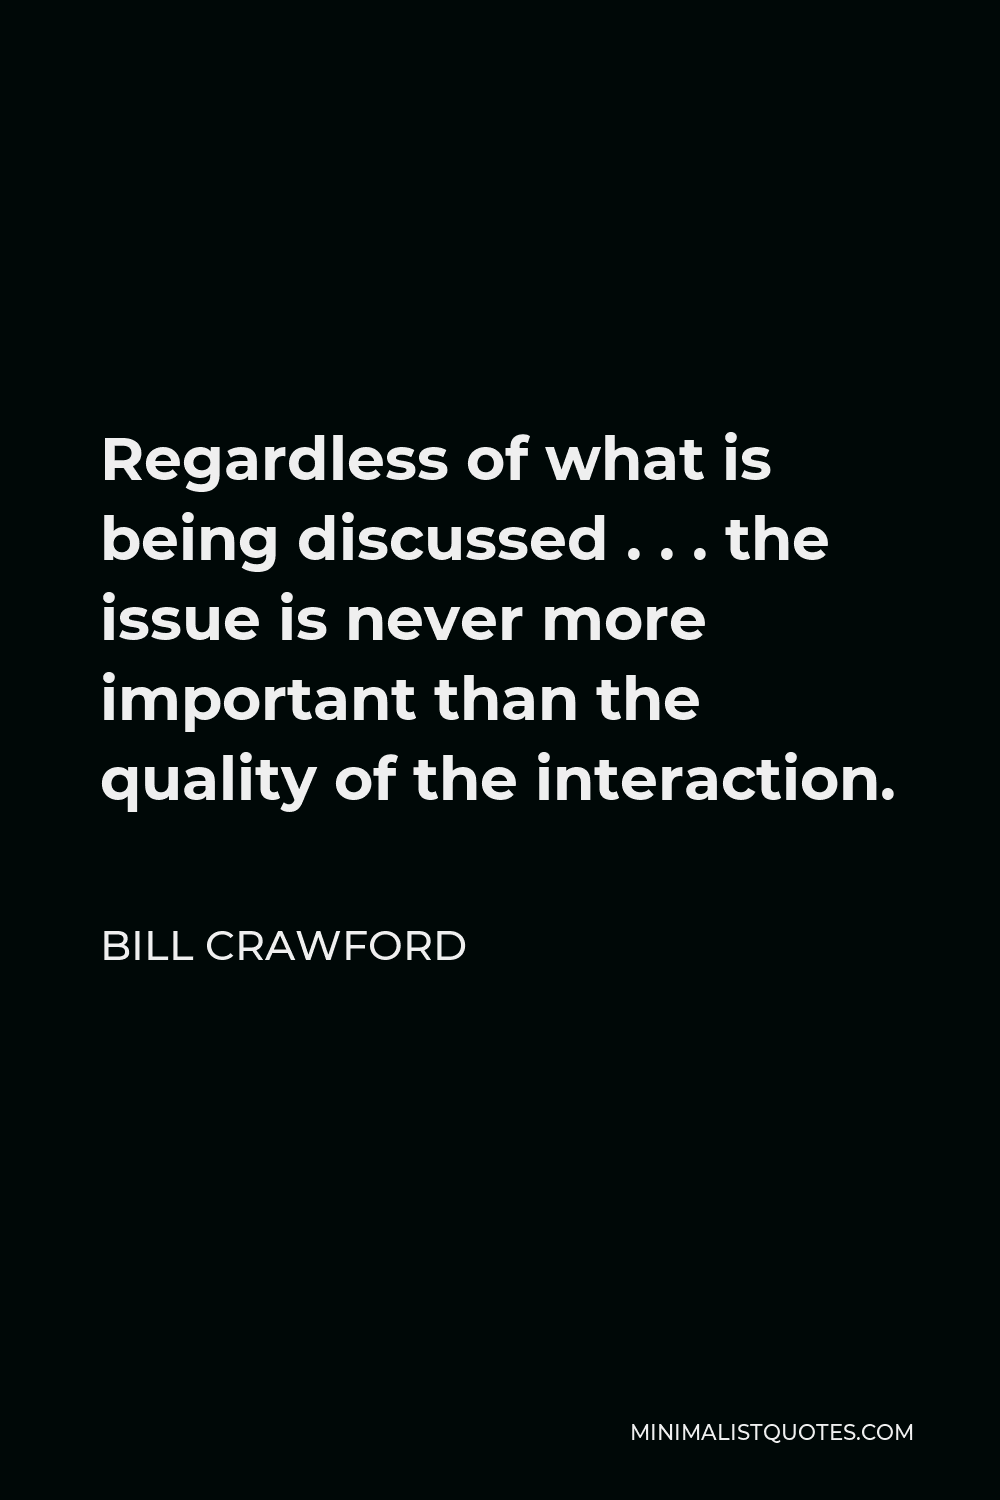 Bill Crawford Quote - Regardless of what is being discussed . . . the issue is never more important than the quality of the interaction.